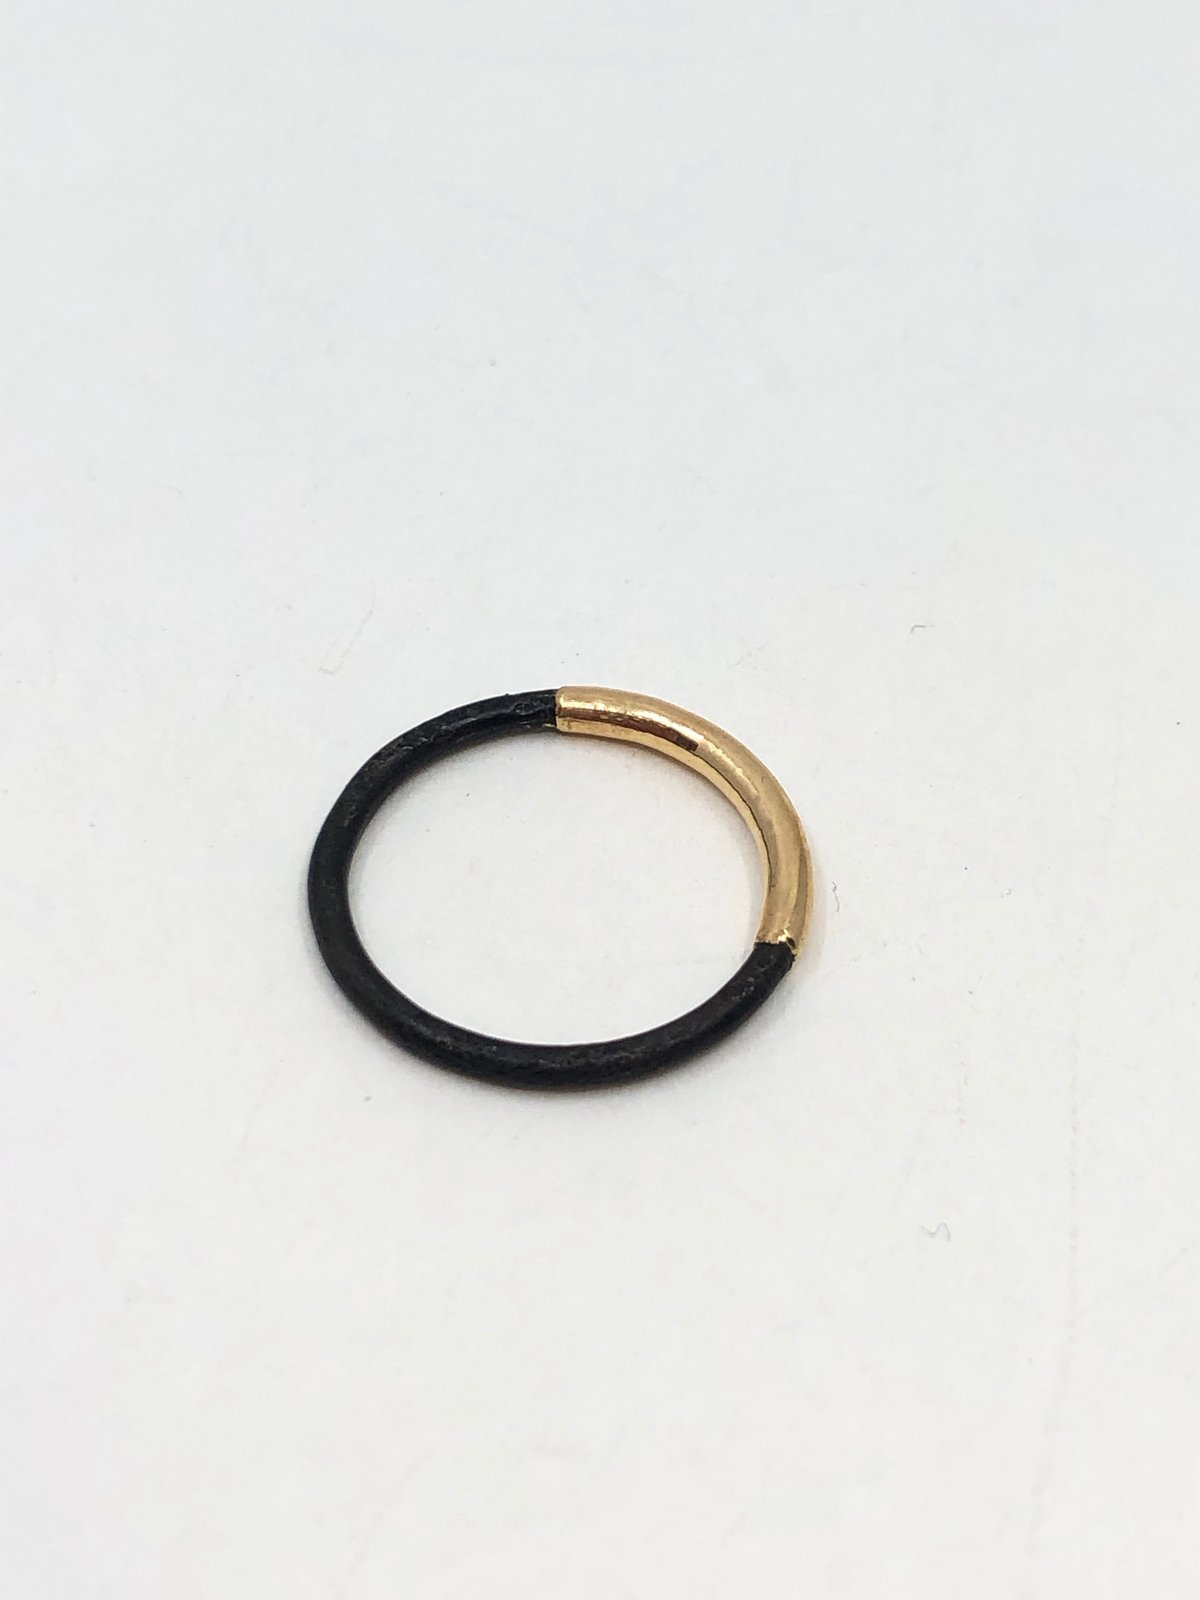 Steel Ring With Gold by Peg Fetter